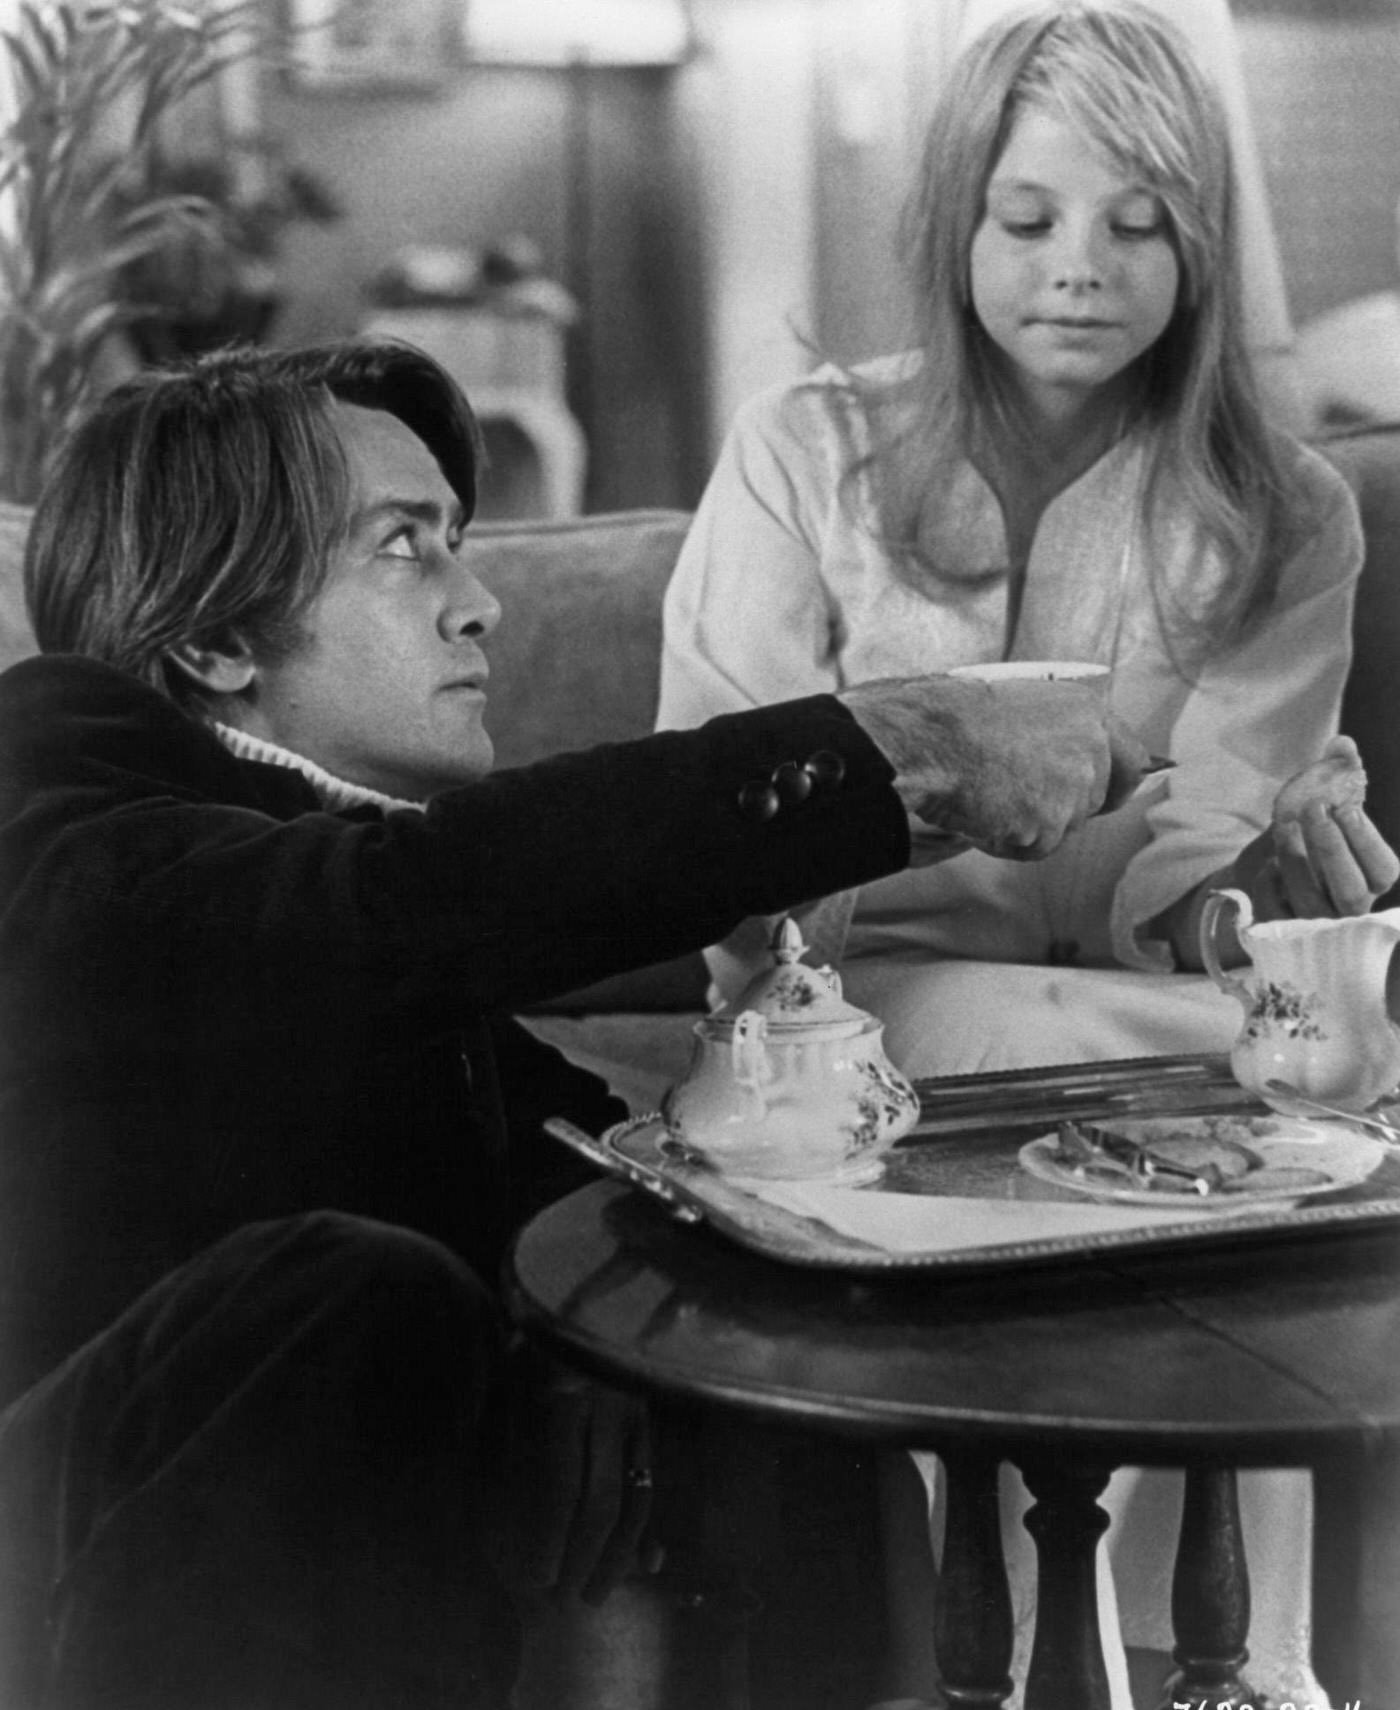 Martin Sheen holding a tea cup in front of Jodie Foster in 'The Little Girl Who Lives Down The Lane', 1976.